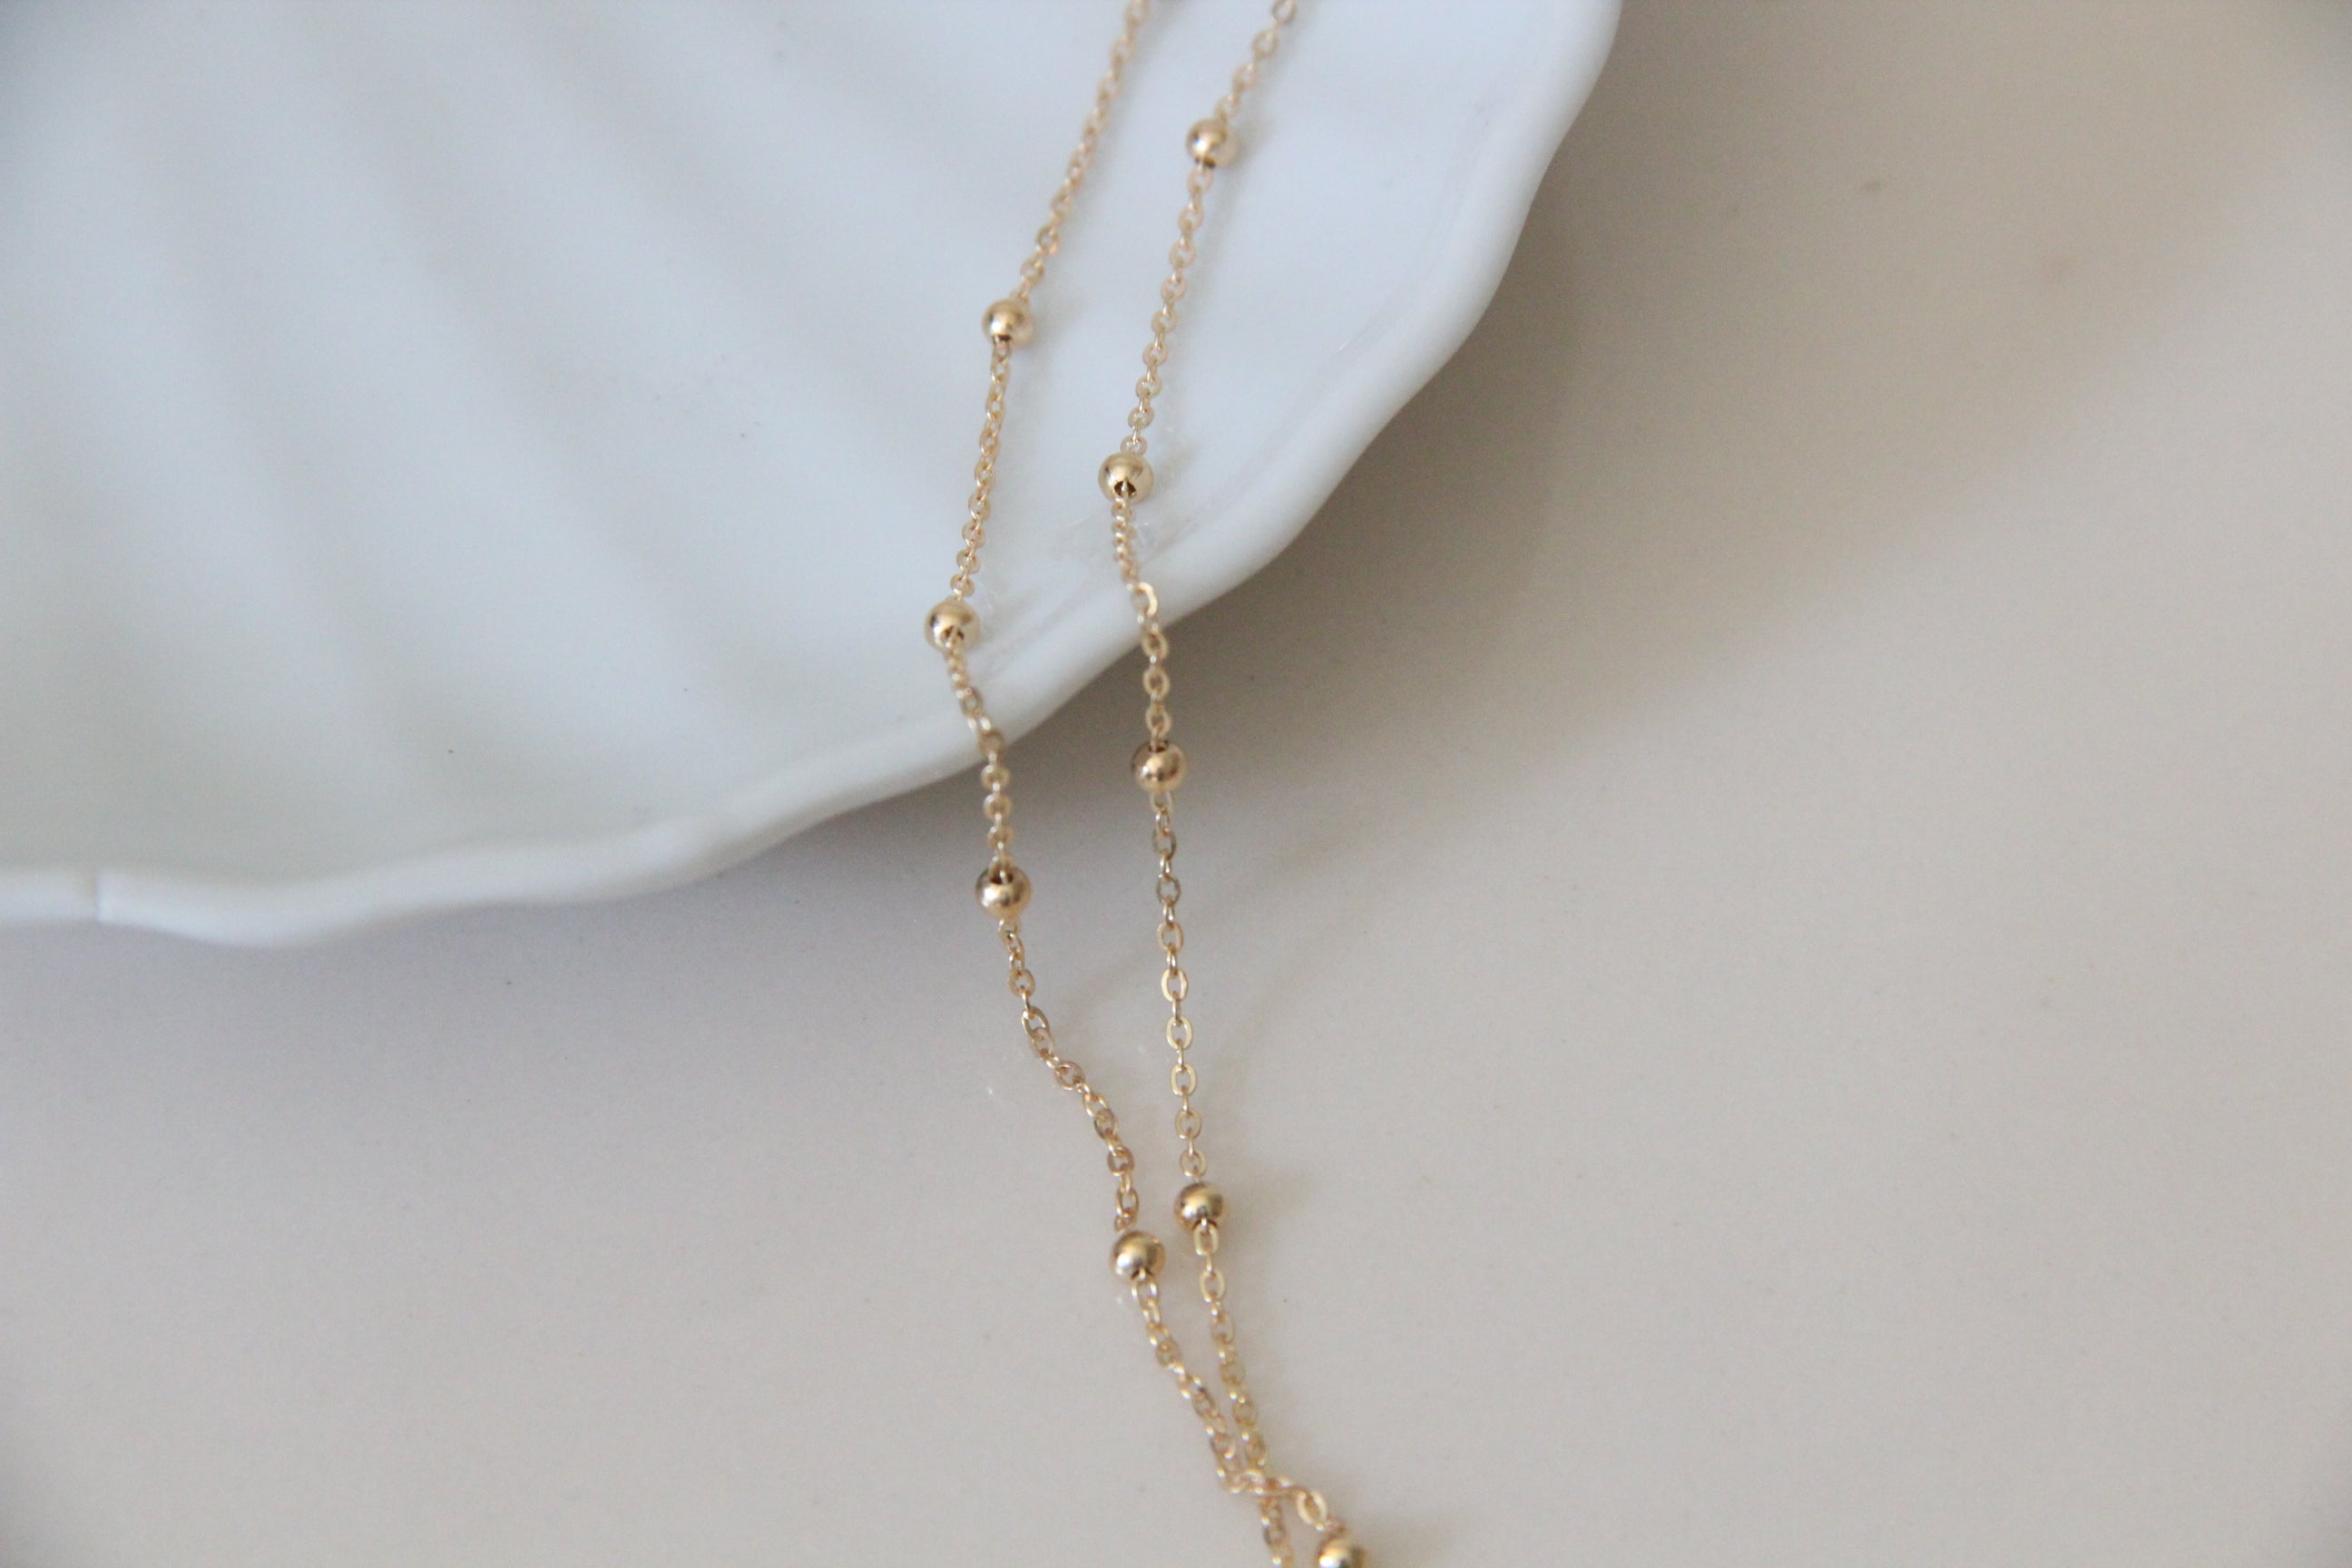 Beaded chain necklace